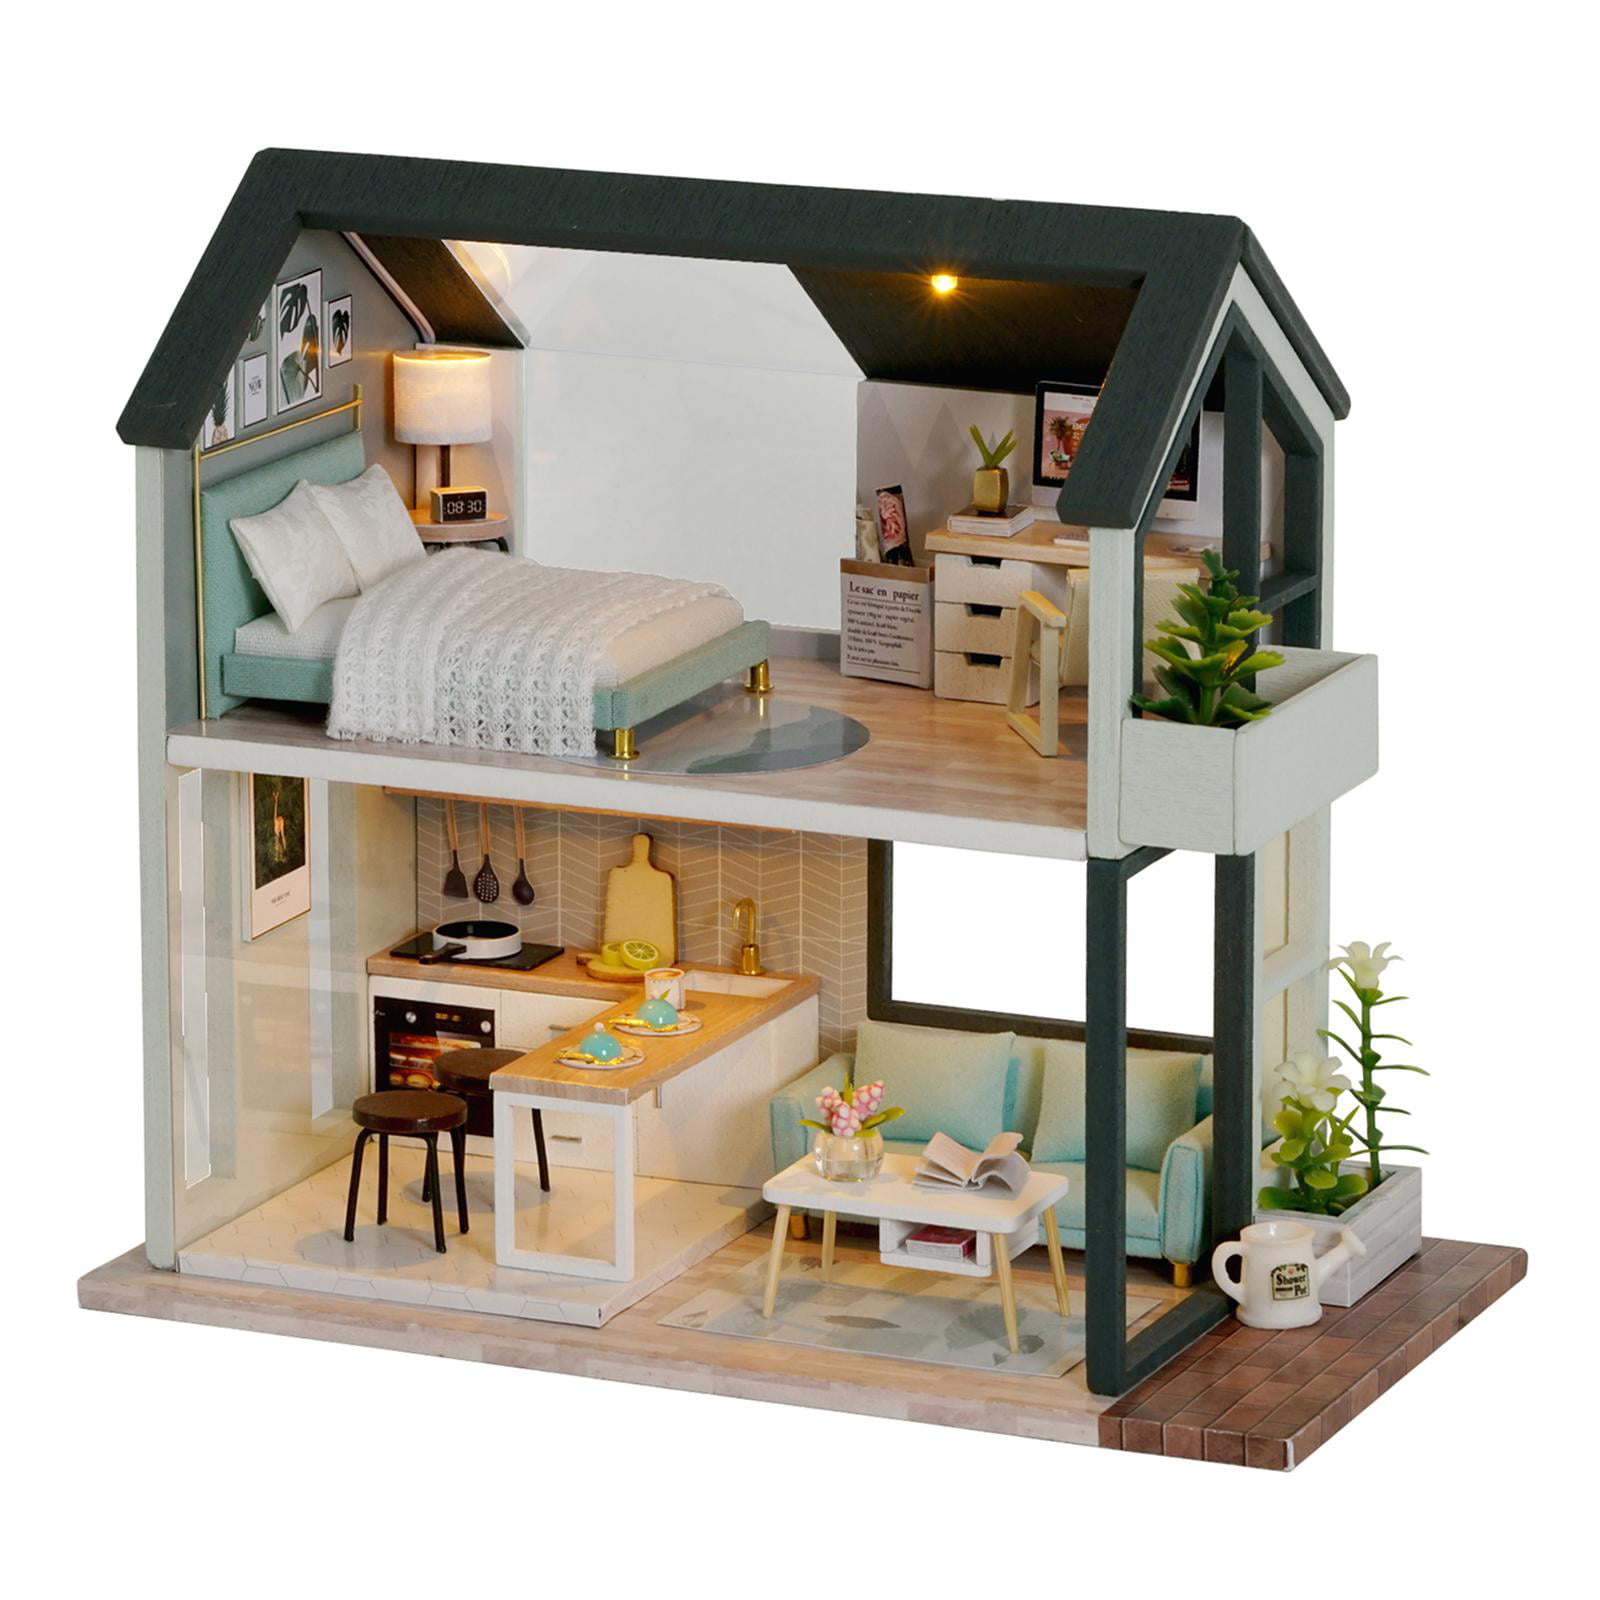 Bedroom Model Toy 1:24 DIY Wooden Doll Houses Miniature Furniture Kit Gift 